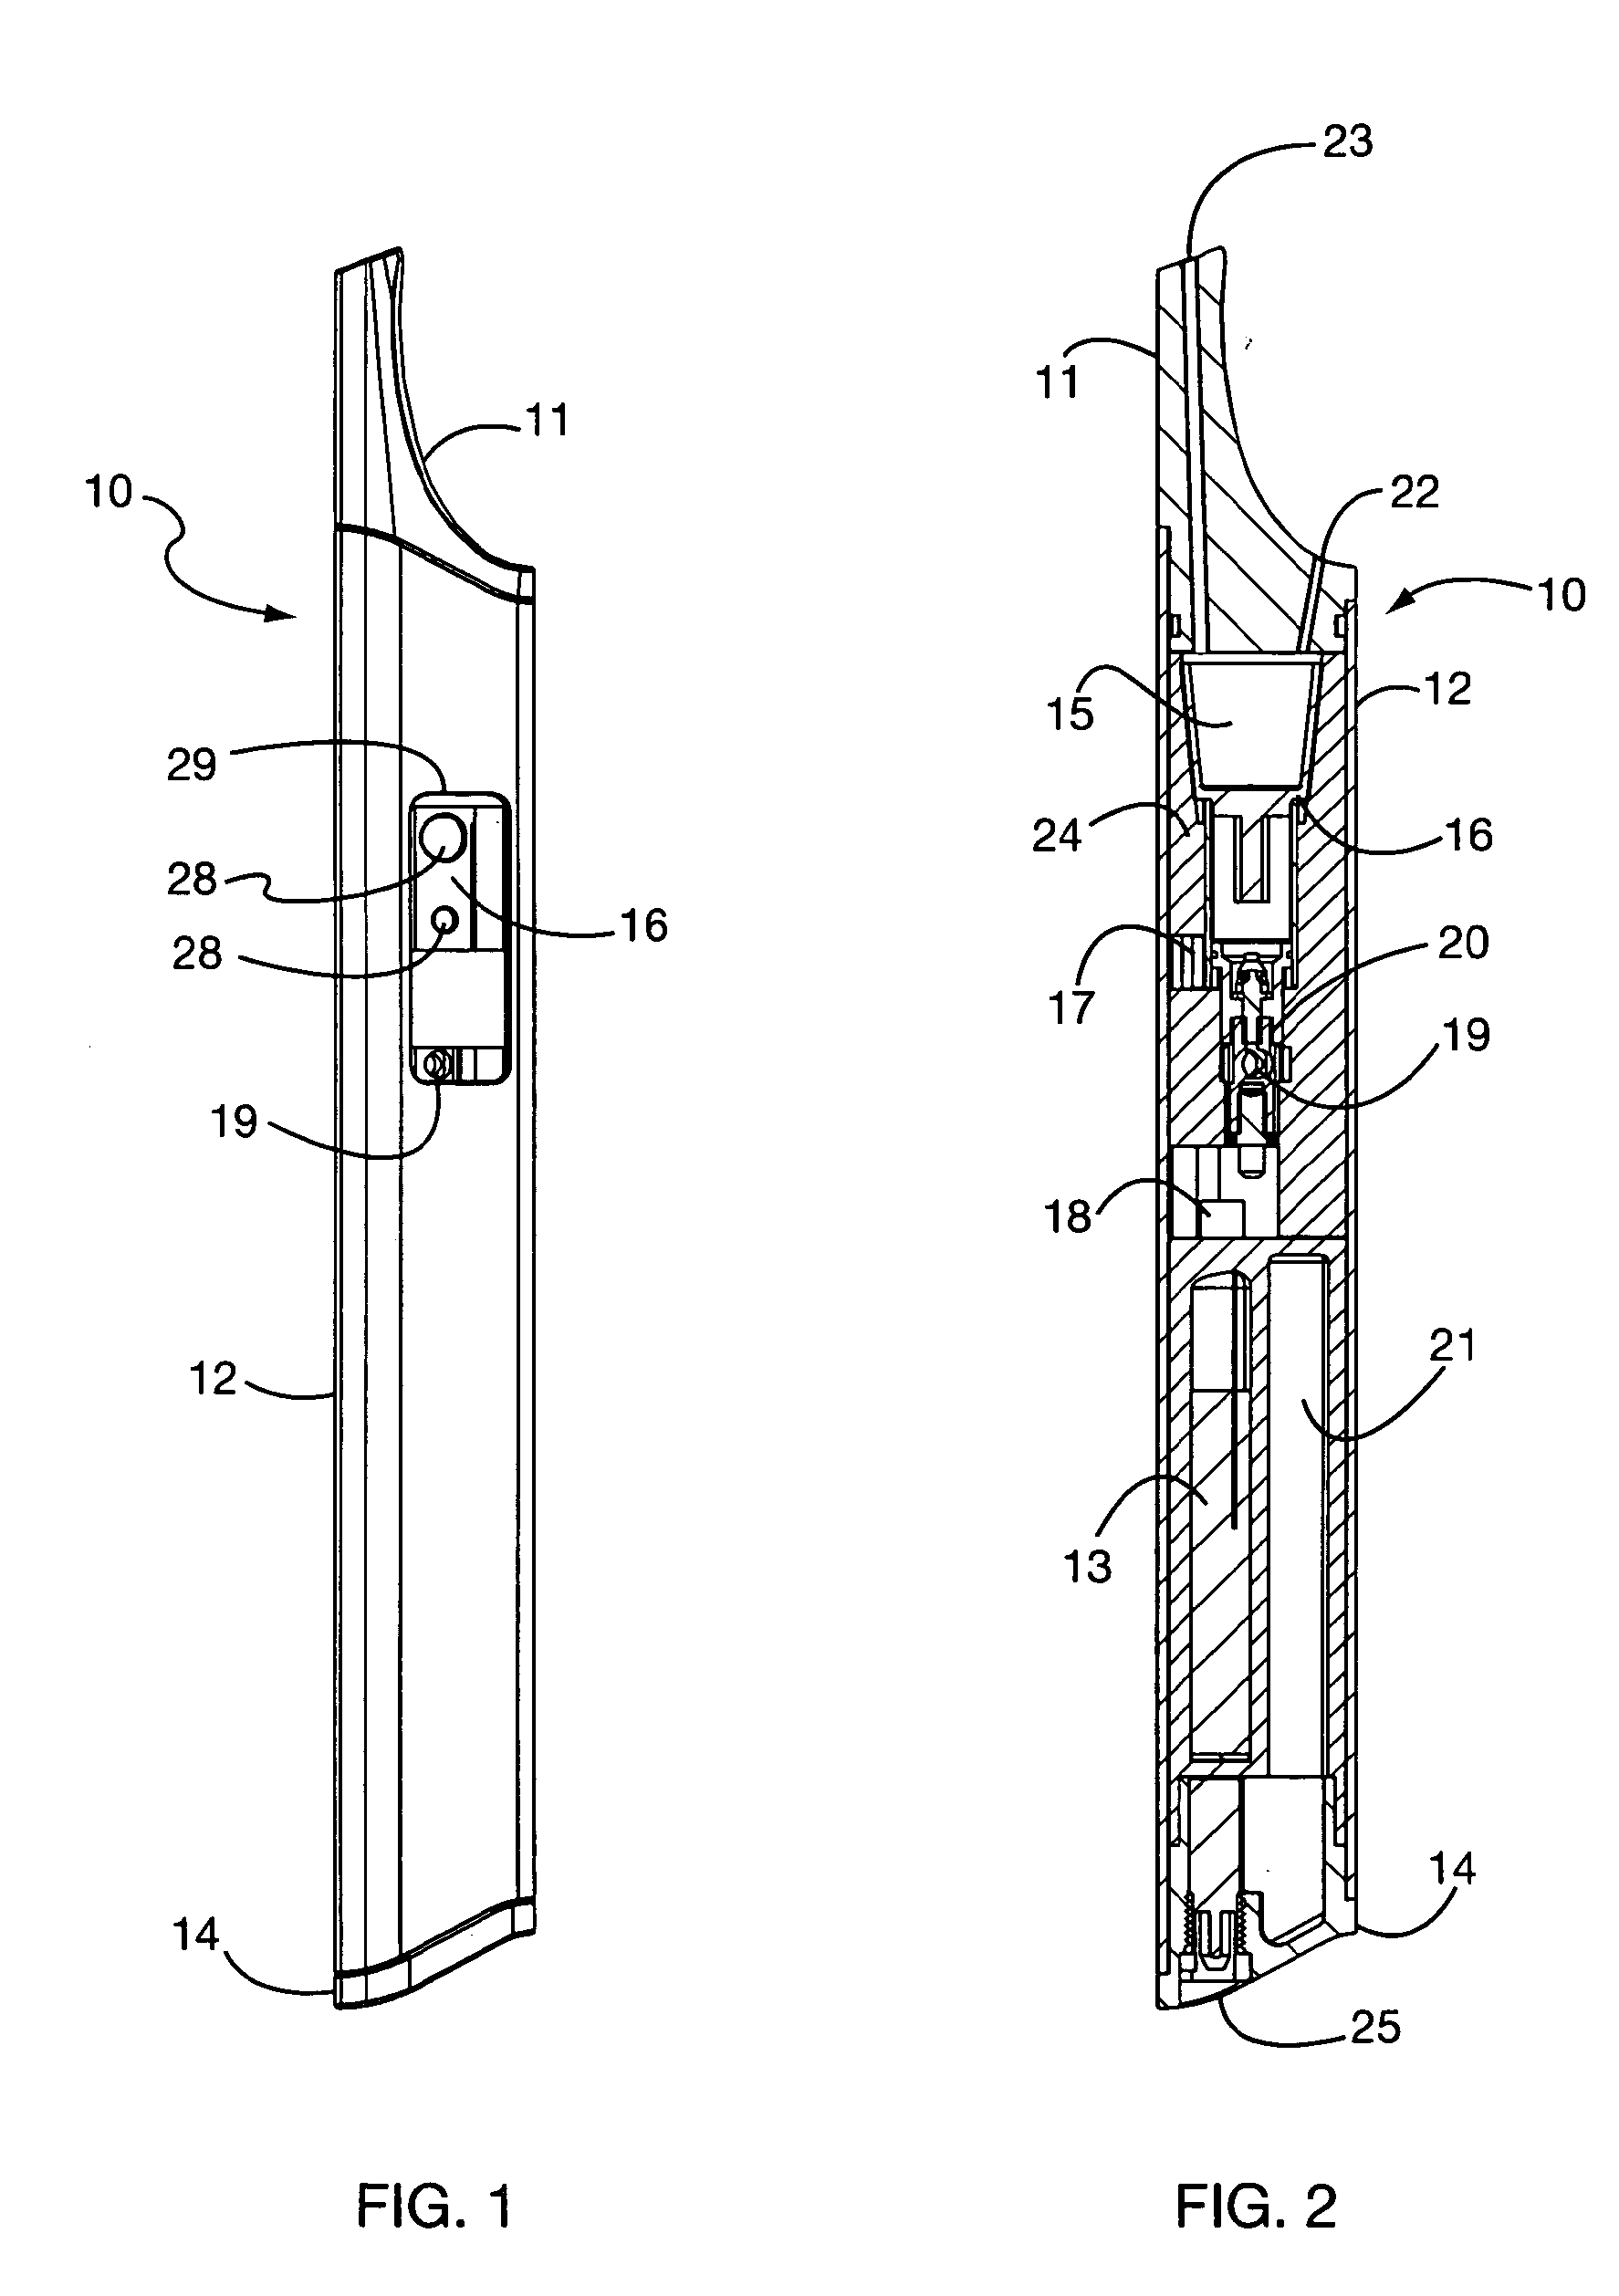 Method and system for vaporization of a substance